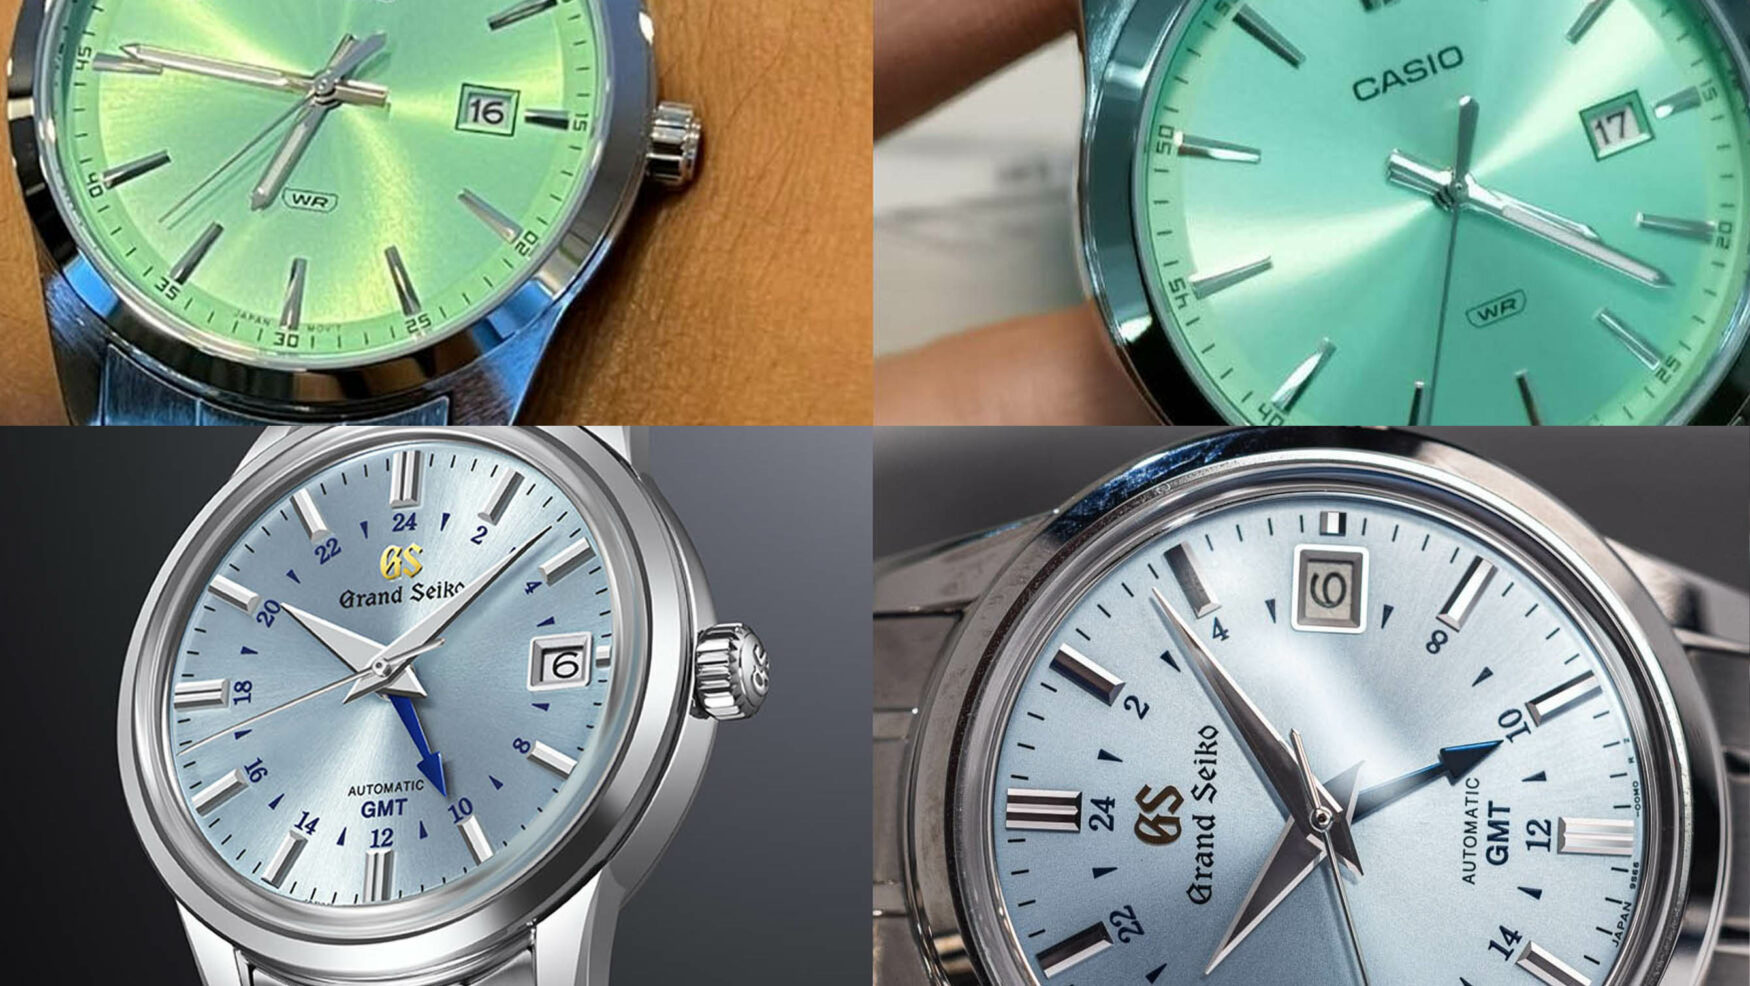 How watches can change in photos versus reality